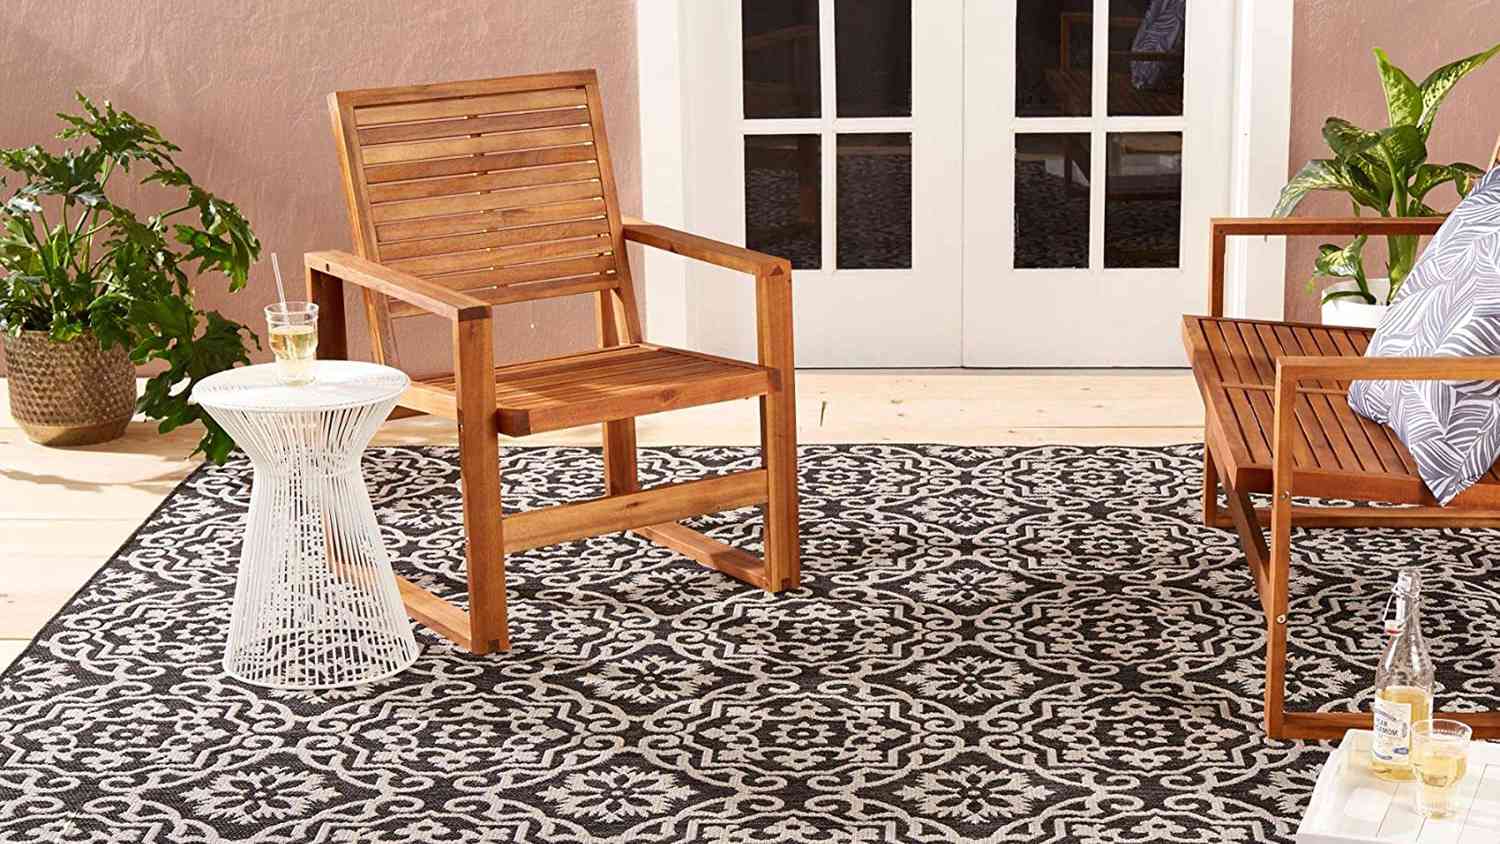 9 Best Outdoor Rugs For 2021 According, What Are The Best Outdoor Rugs Made Of Vinyl